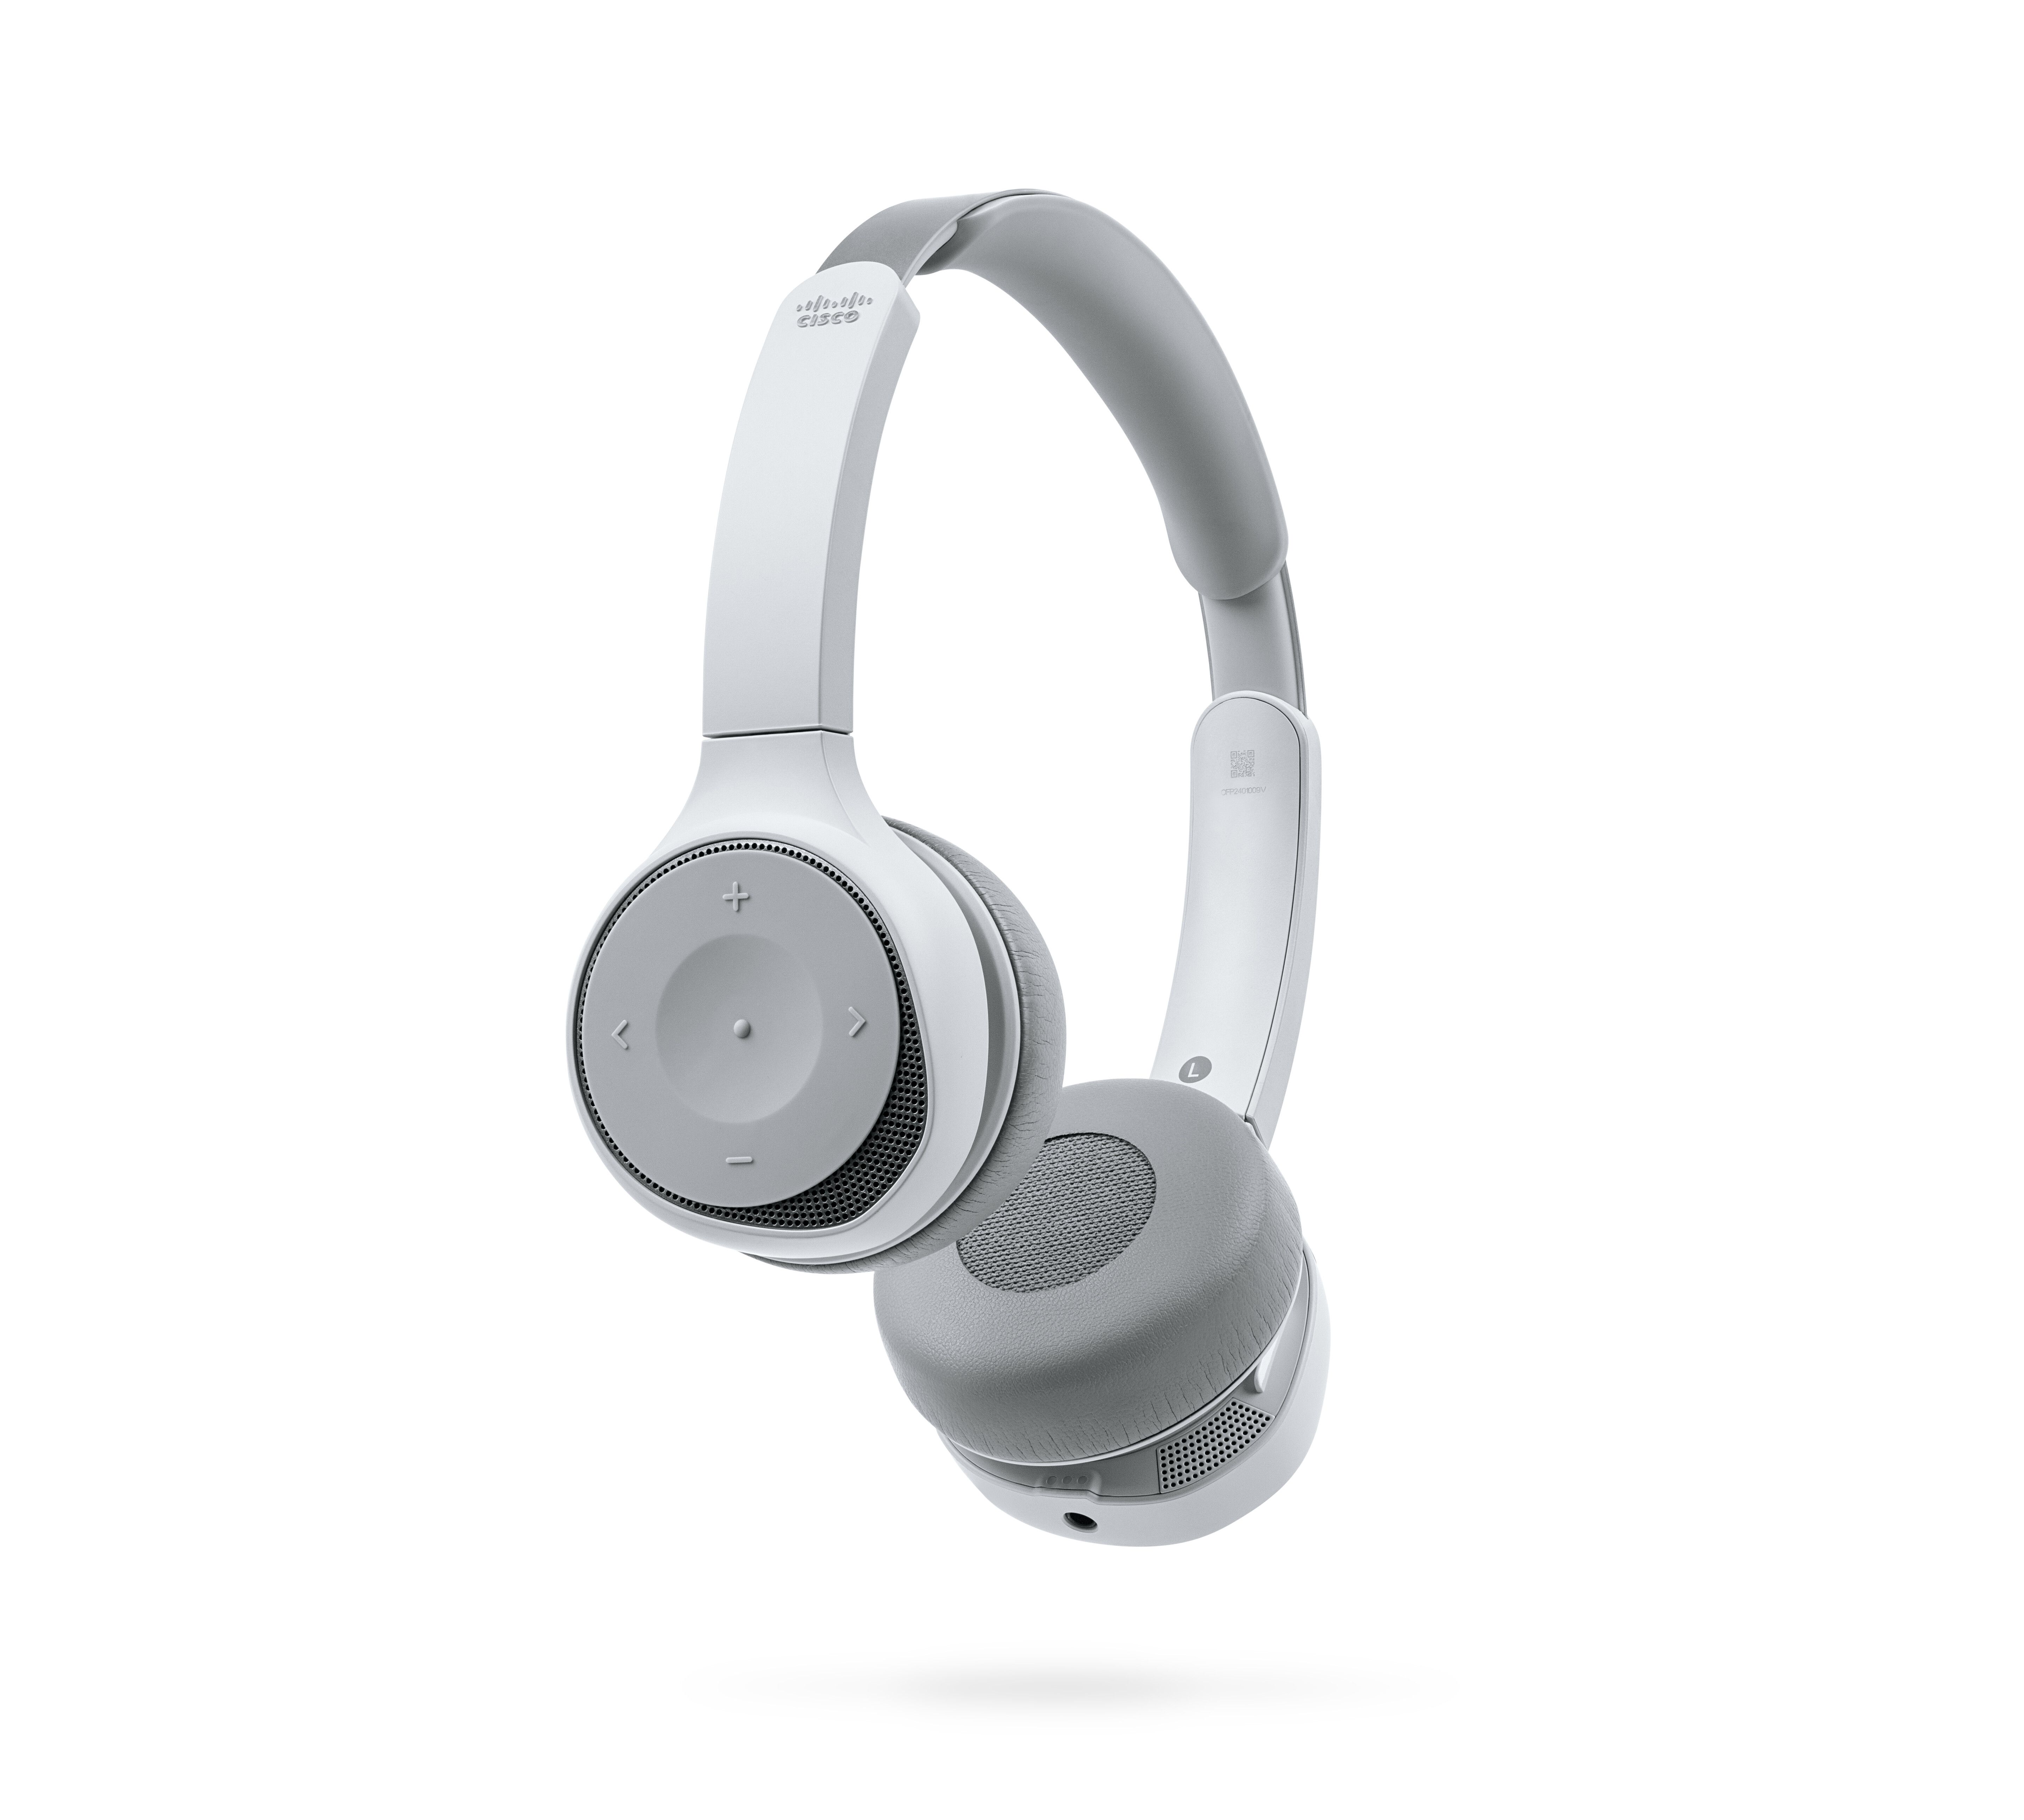 A side view of a Cisco Headset 730 in platinum